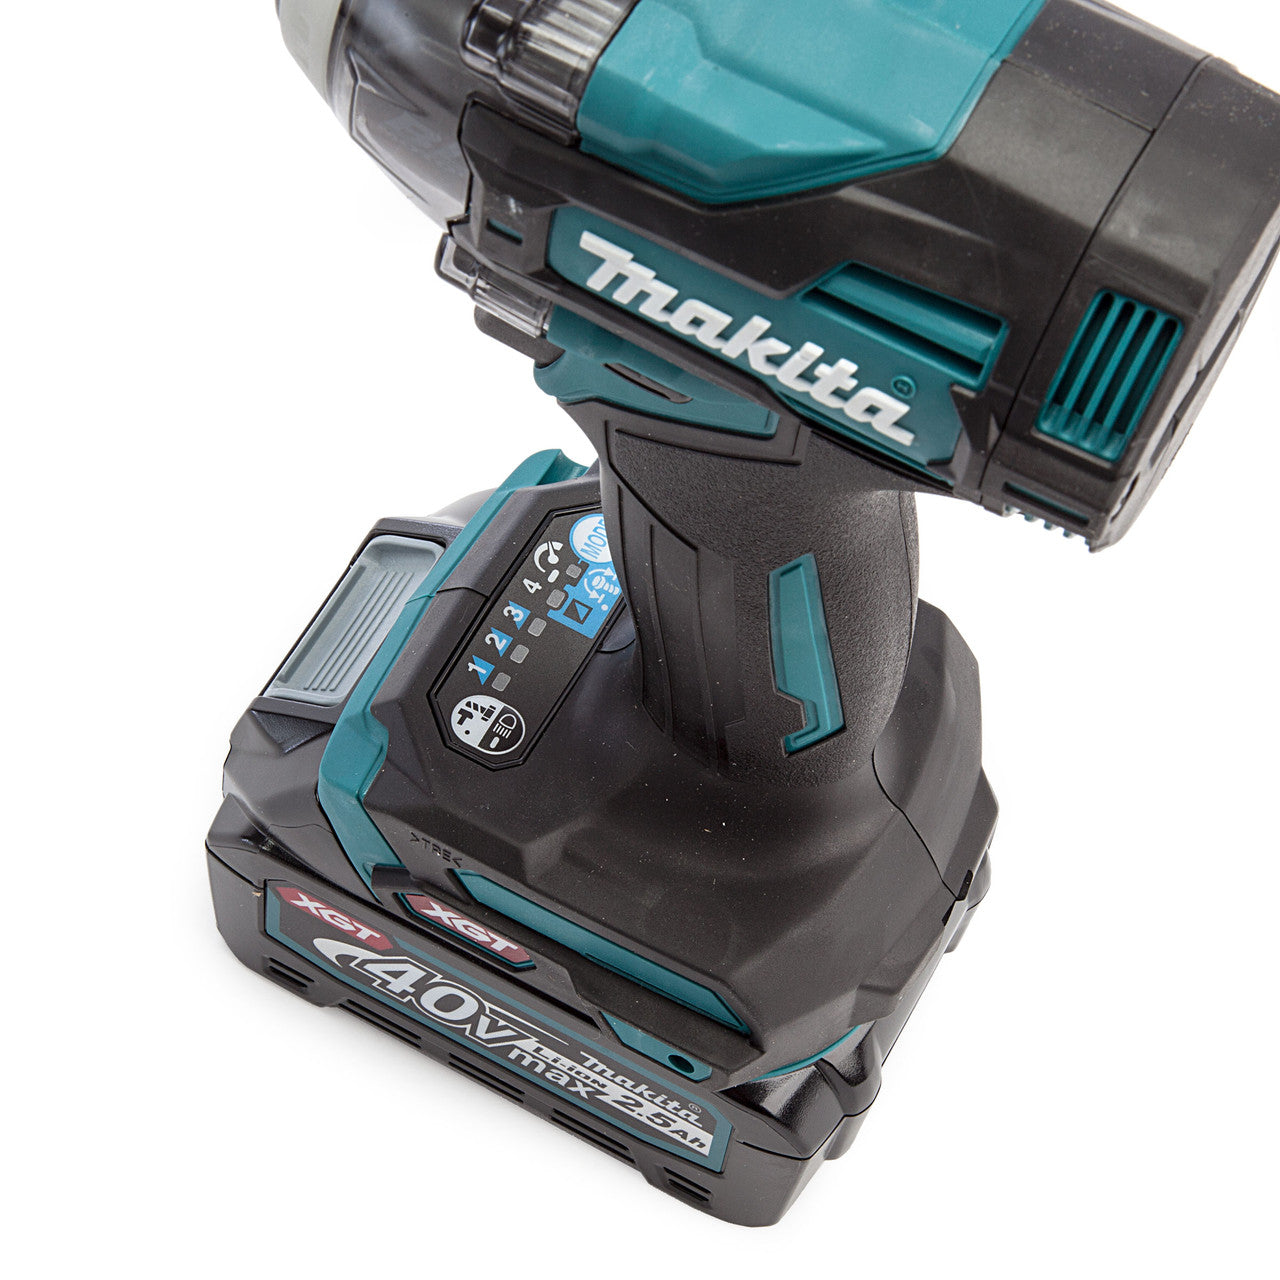 Makita TW004GD203 40Vmax XGT Brushless Impact Wrench (2 x 2.5Ah Batteries)